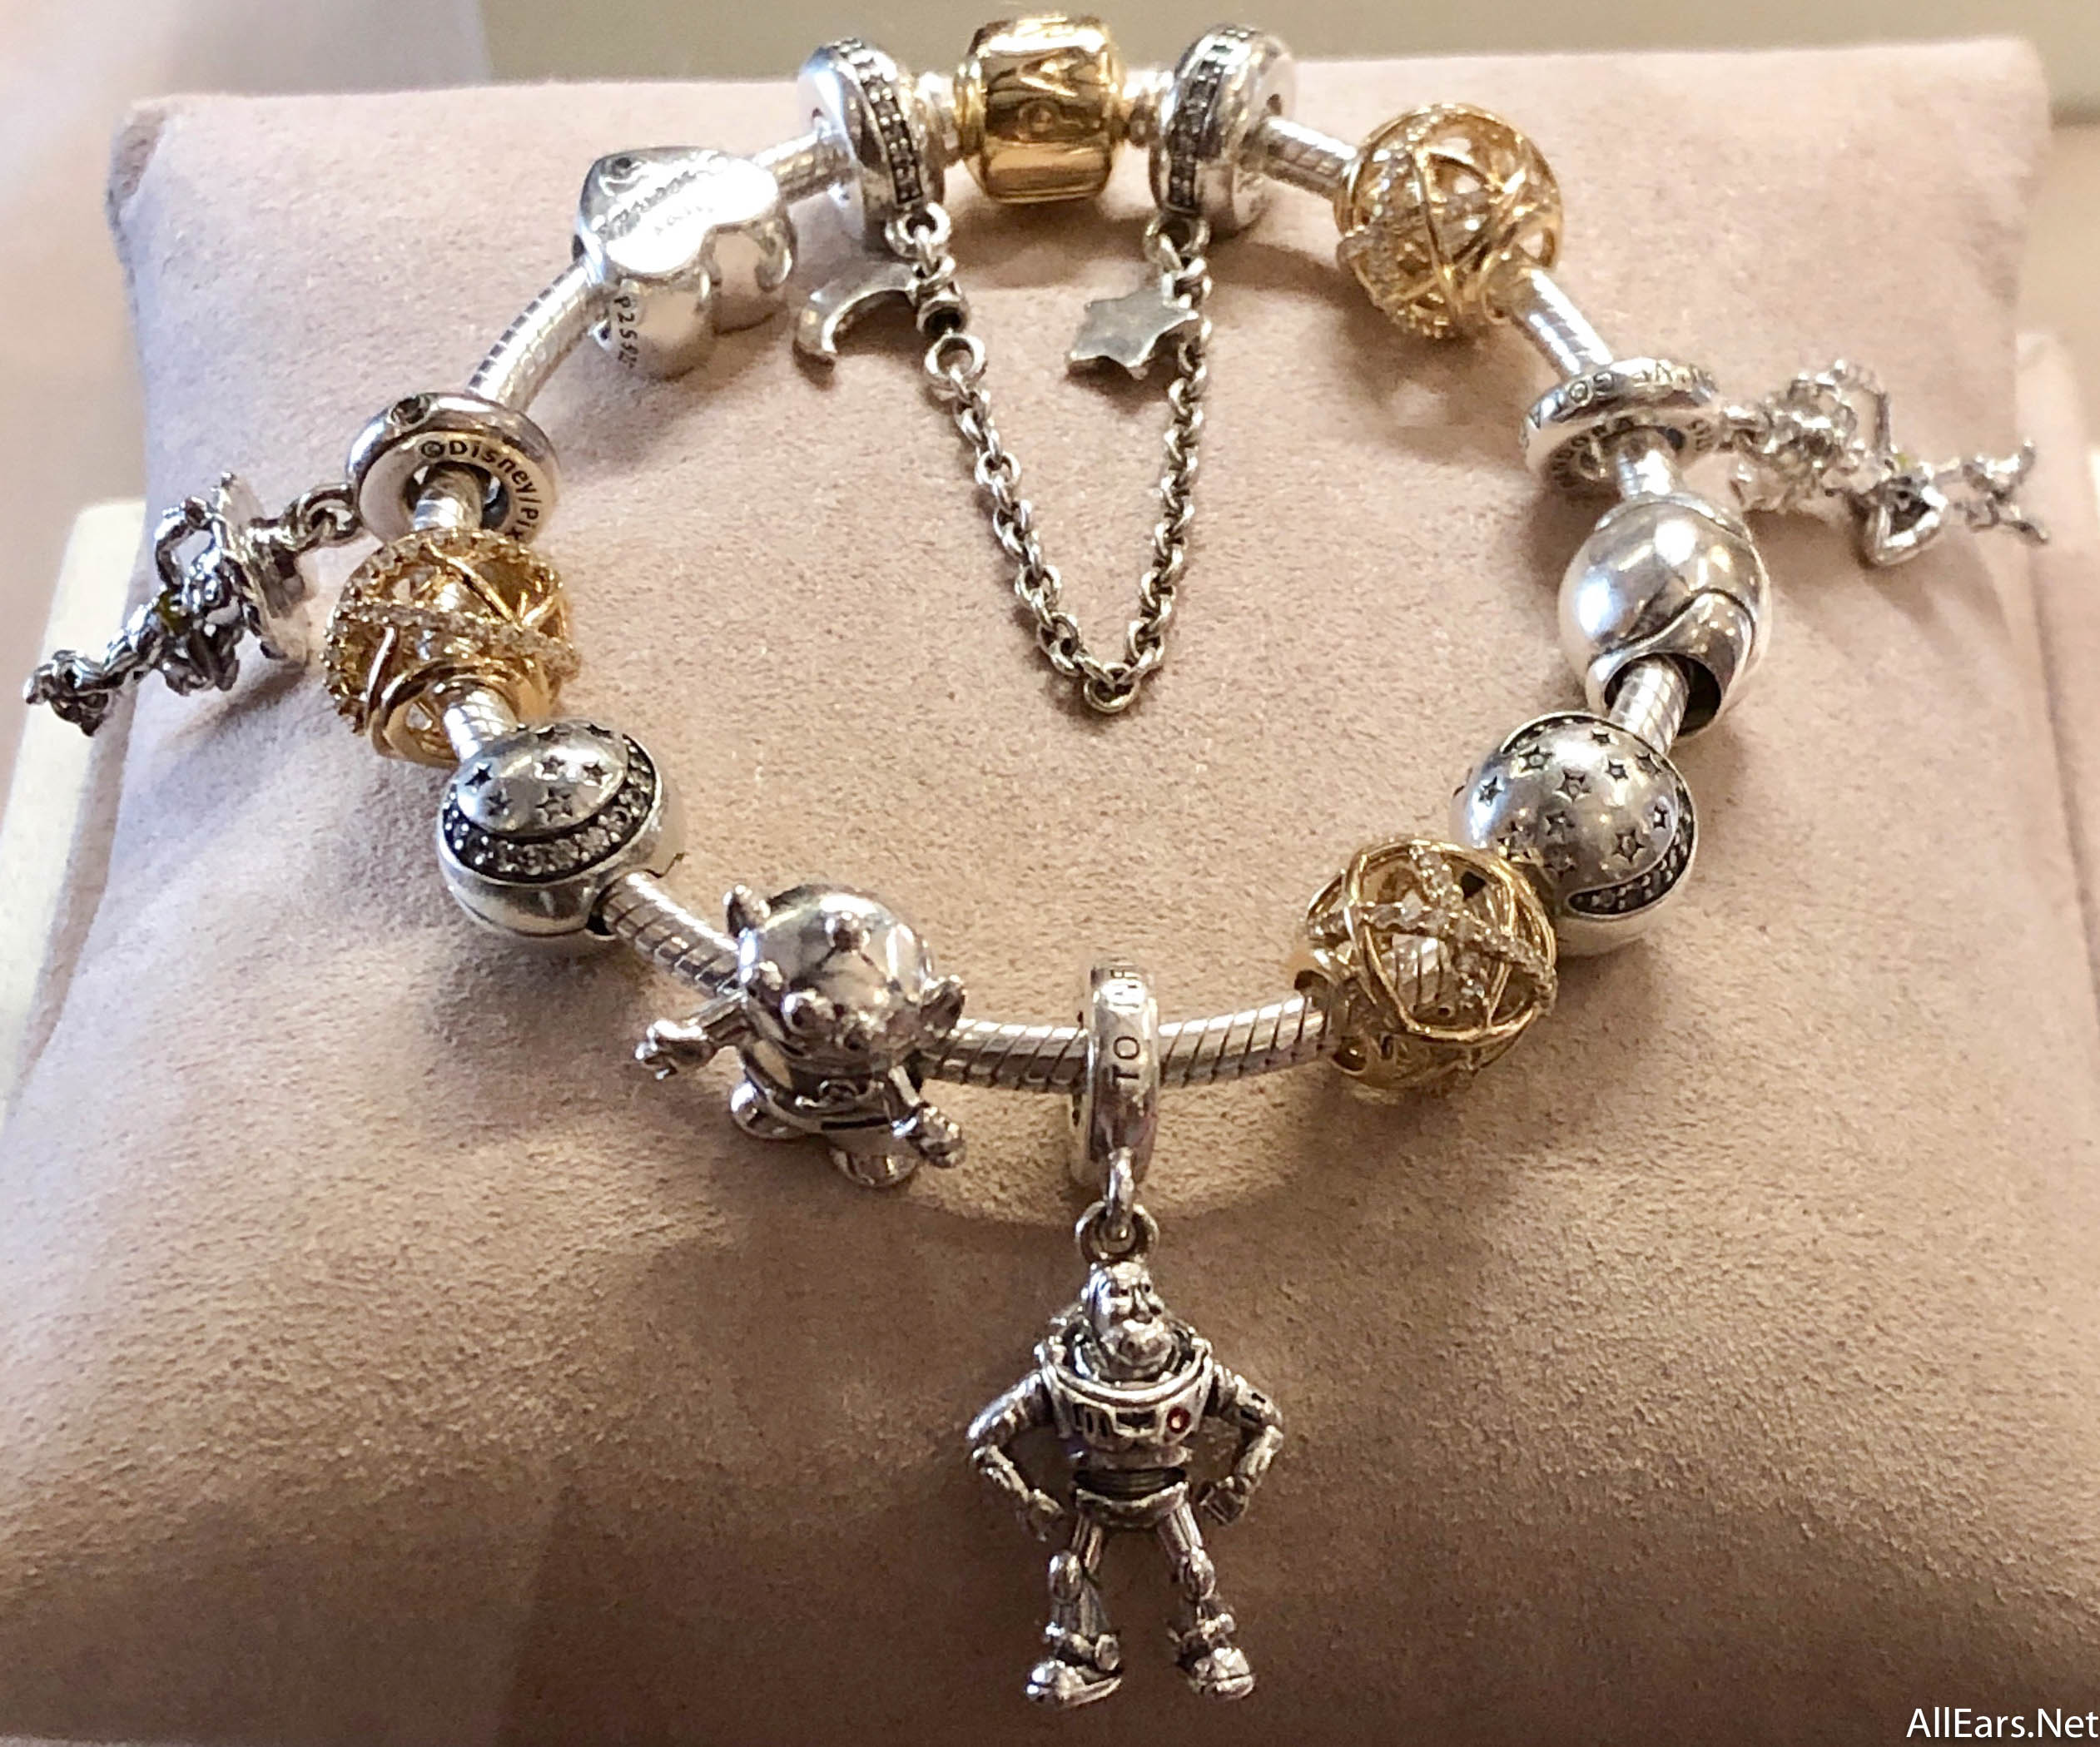 New Toy Story Pandora Charms Make Their Way to Disney Parks - AllEars.Net